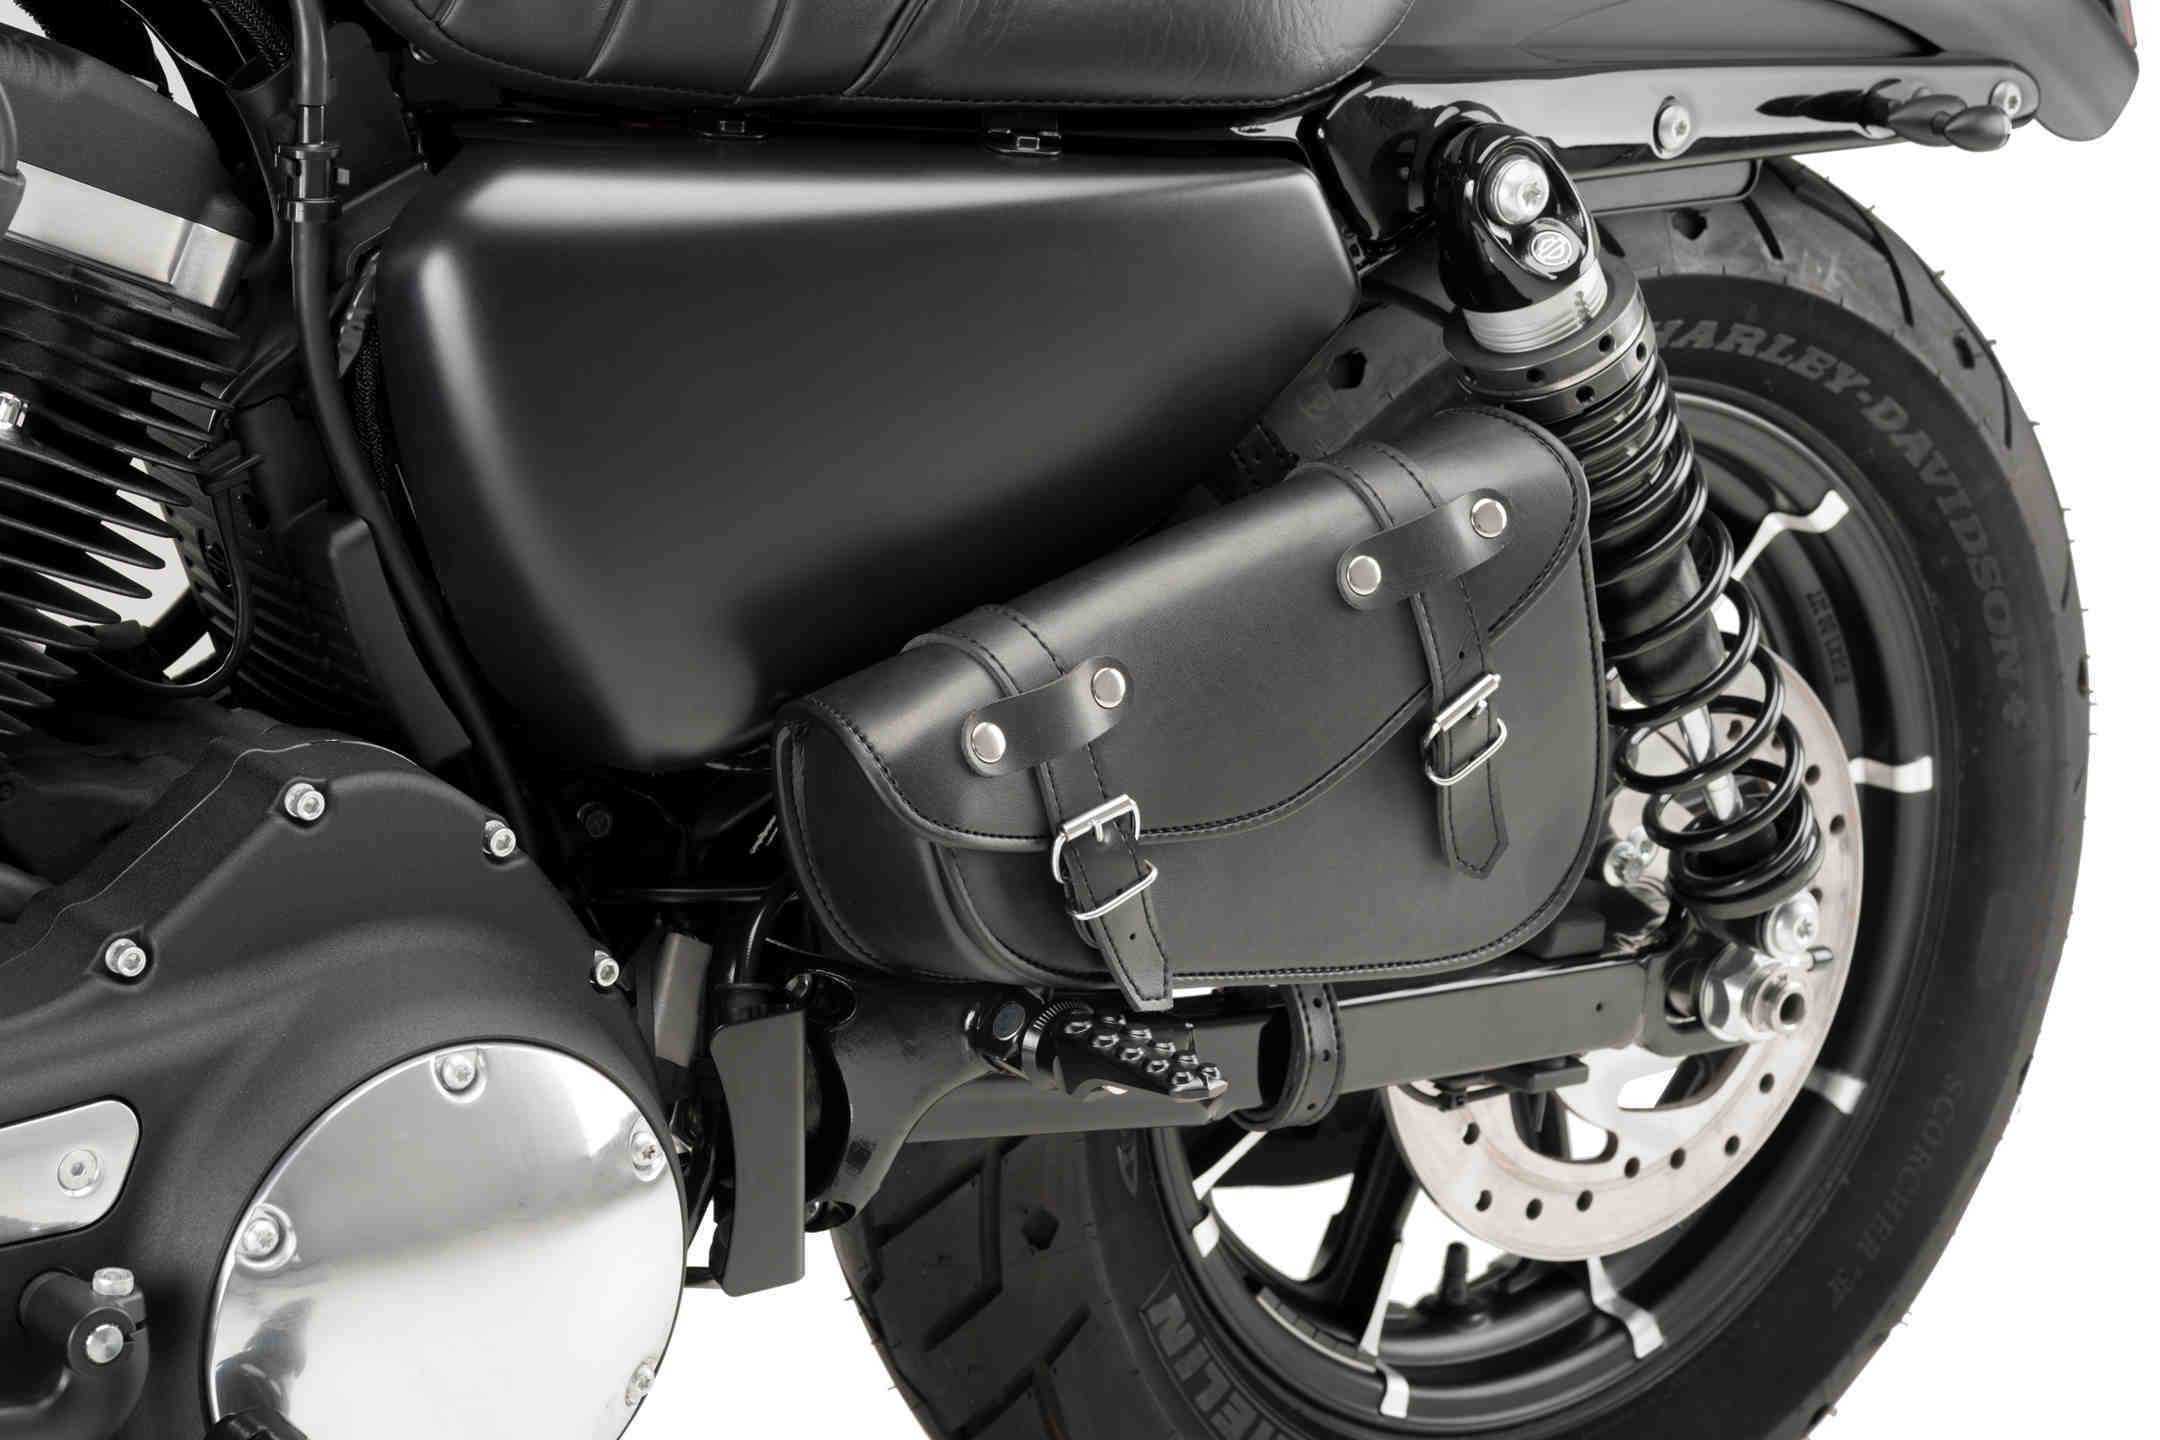 Customacces Detroit Left Saddlebag No Support Included | Black | Honda VTX 1800 C 2002>2010-XAP0003N-Storage-Pyramid Motorcycle Accessories